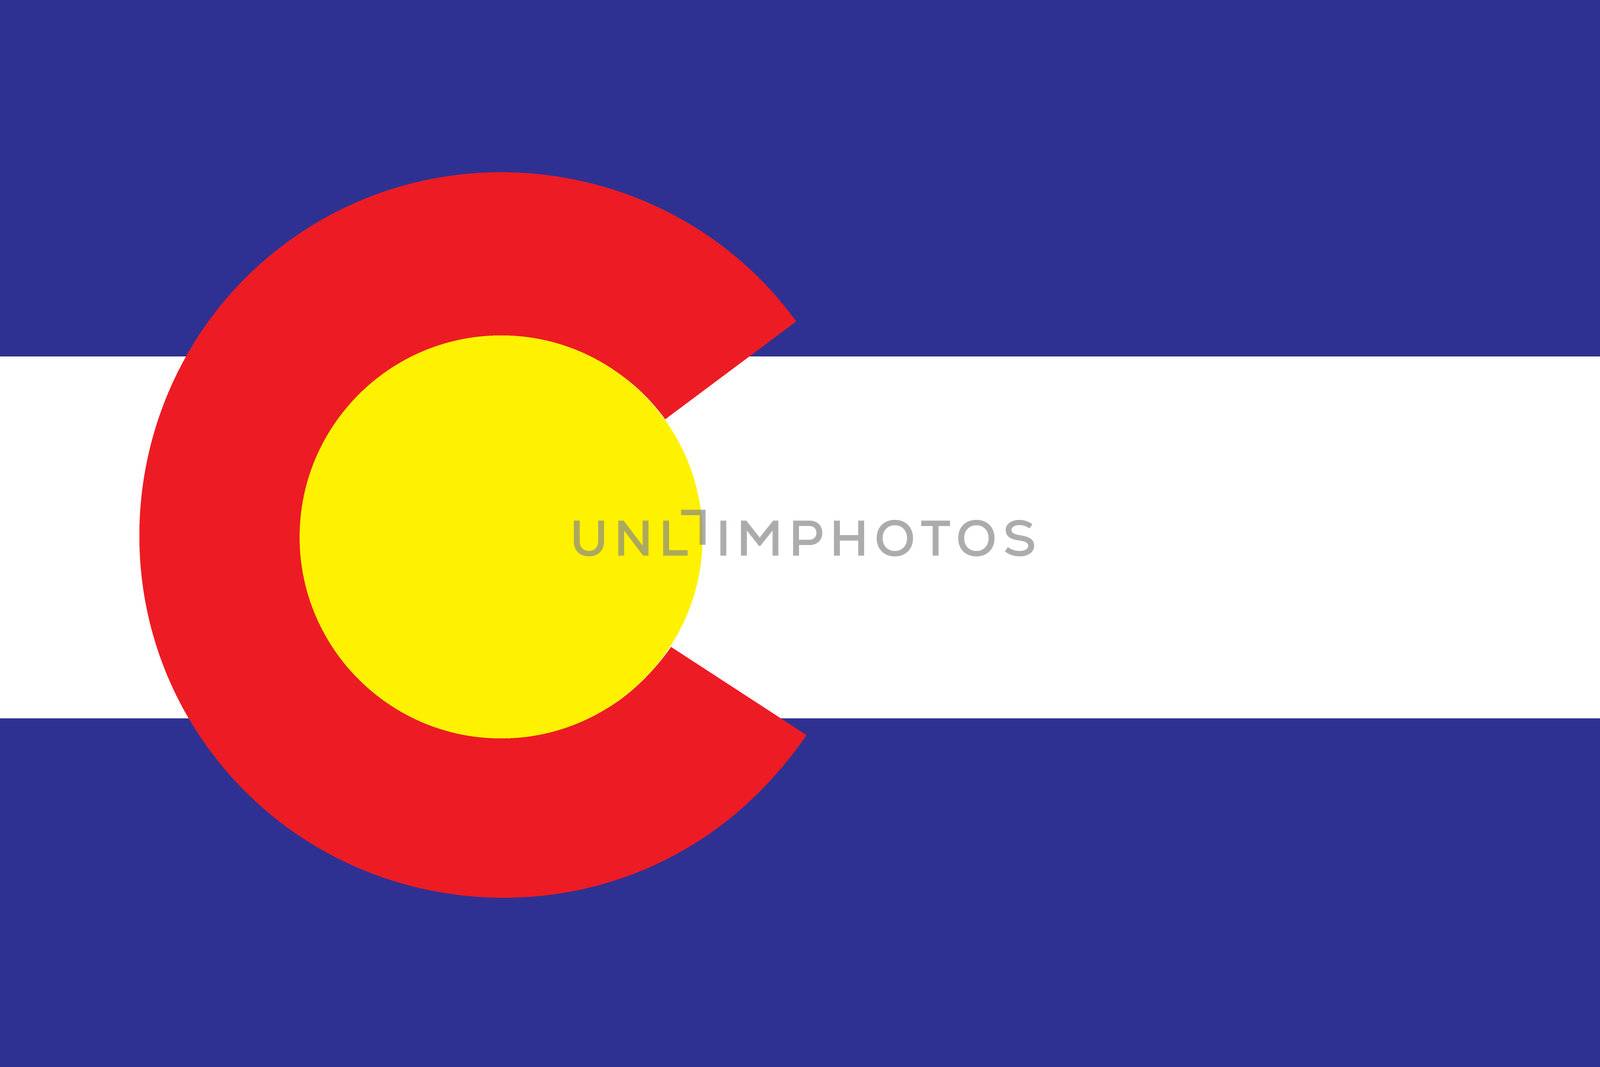 The Flag of the American State of Colorado